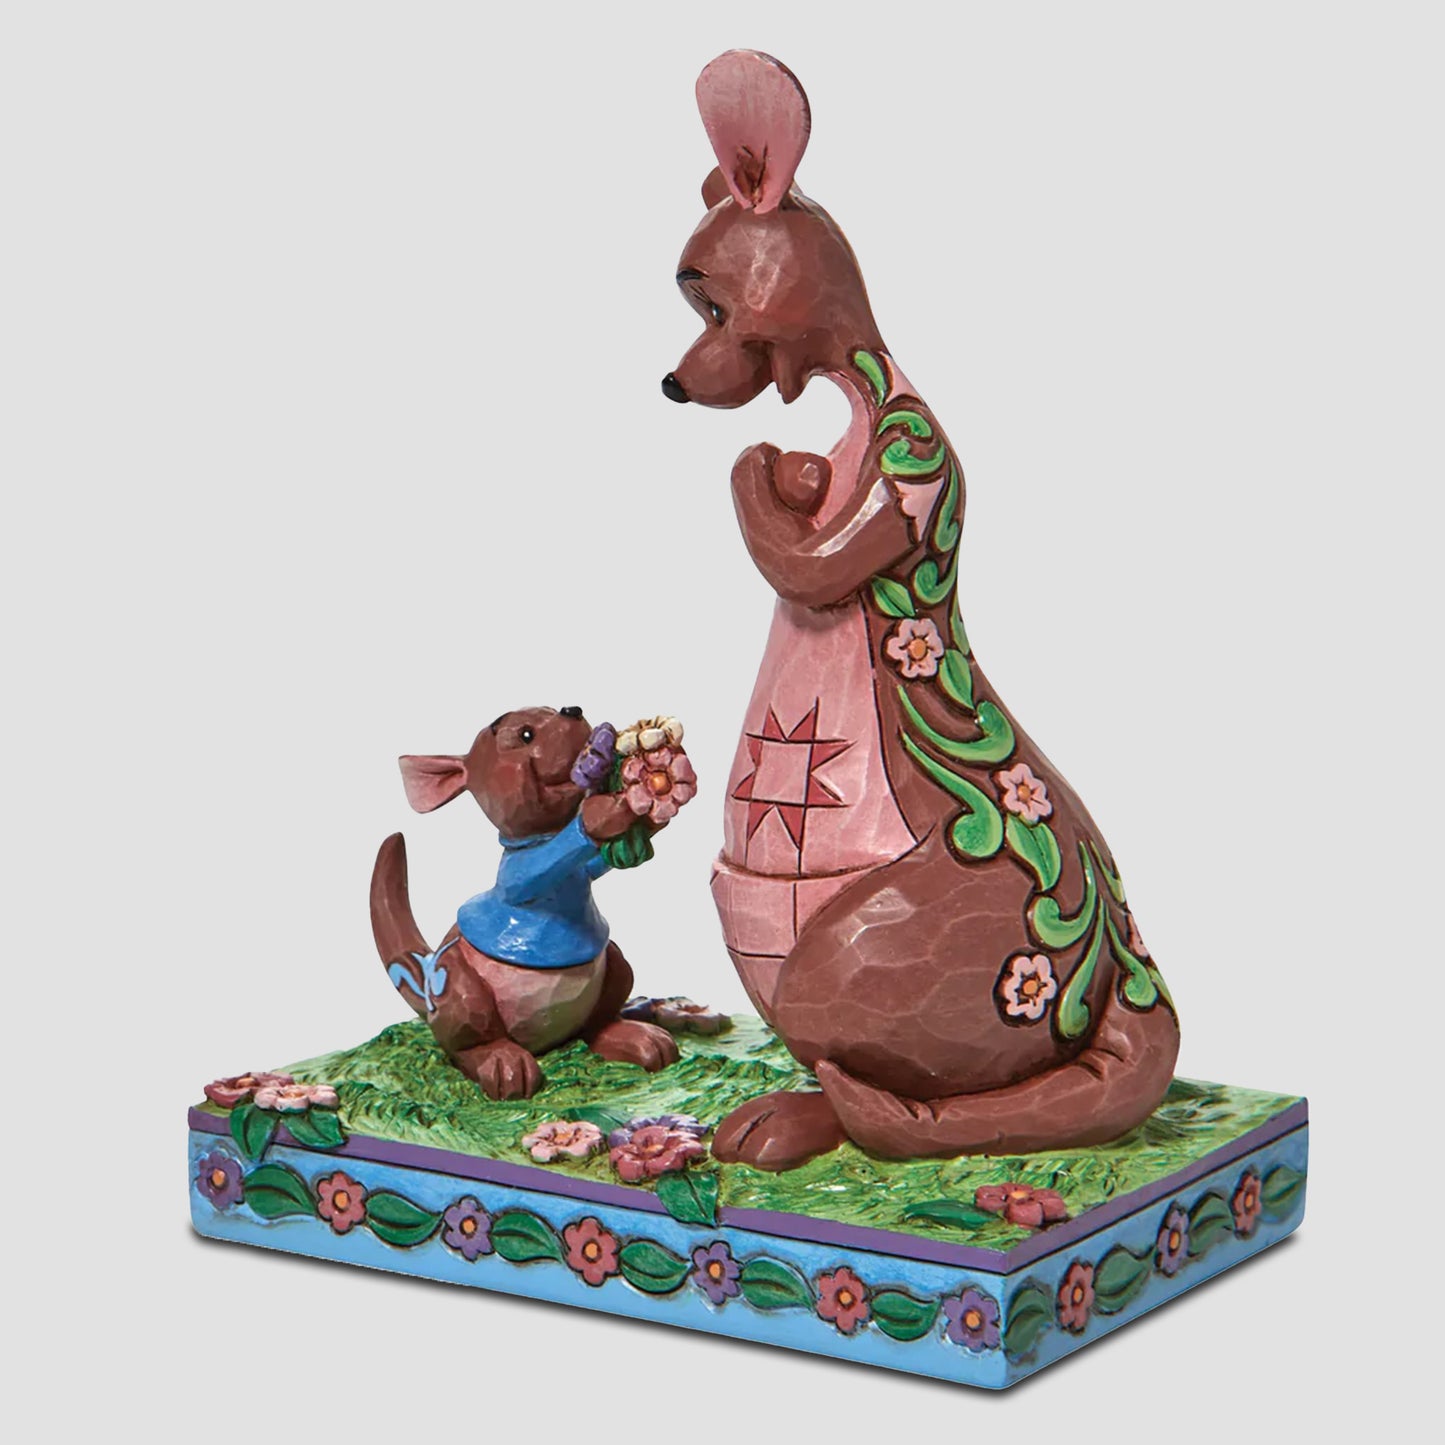 Kanga and Roo "The Sweetest Gift" (Winnie the Pooh) Disney Traditions Statue